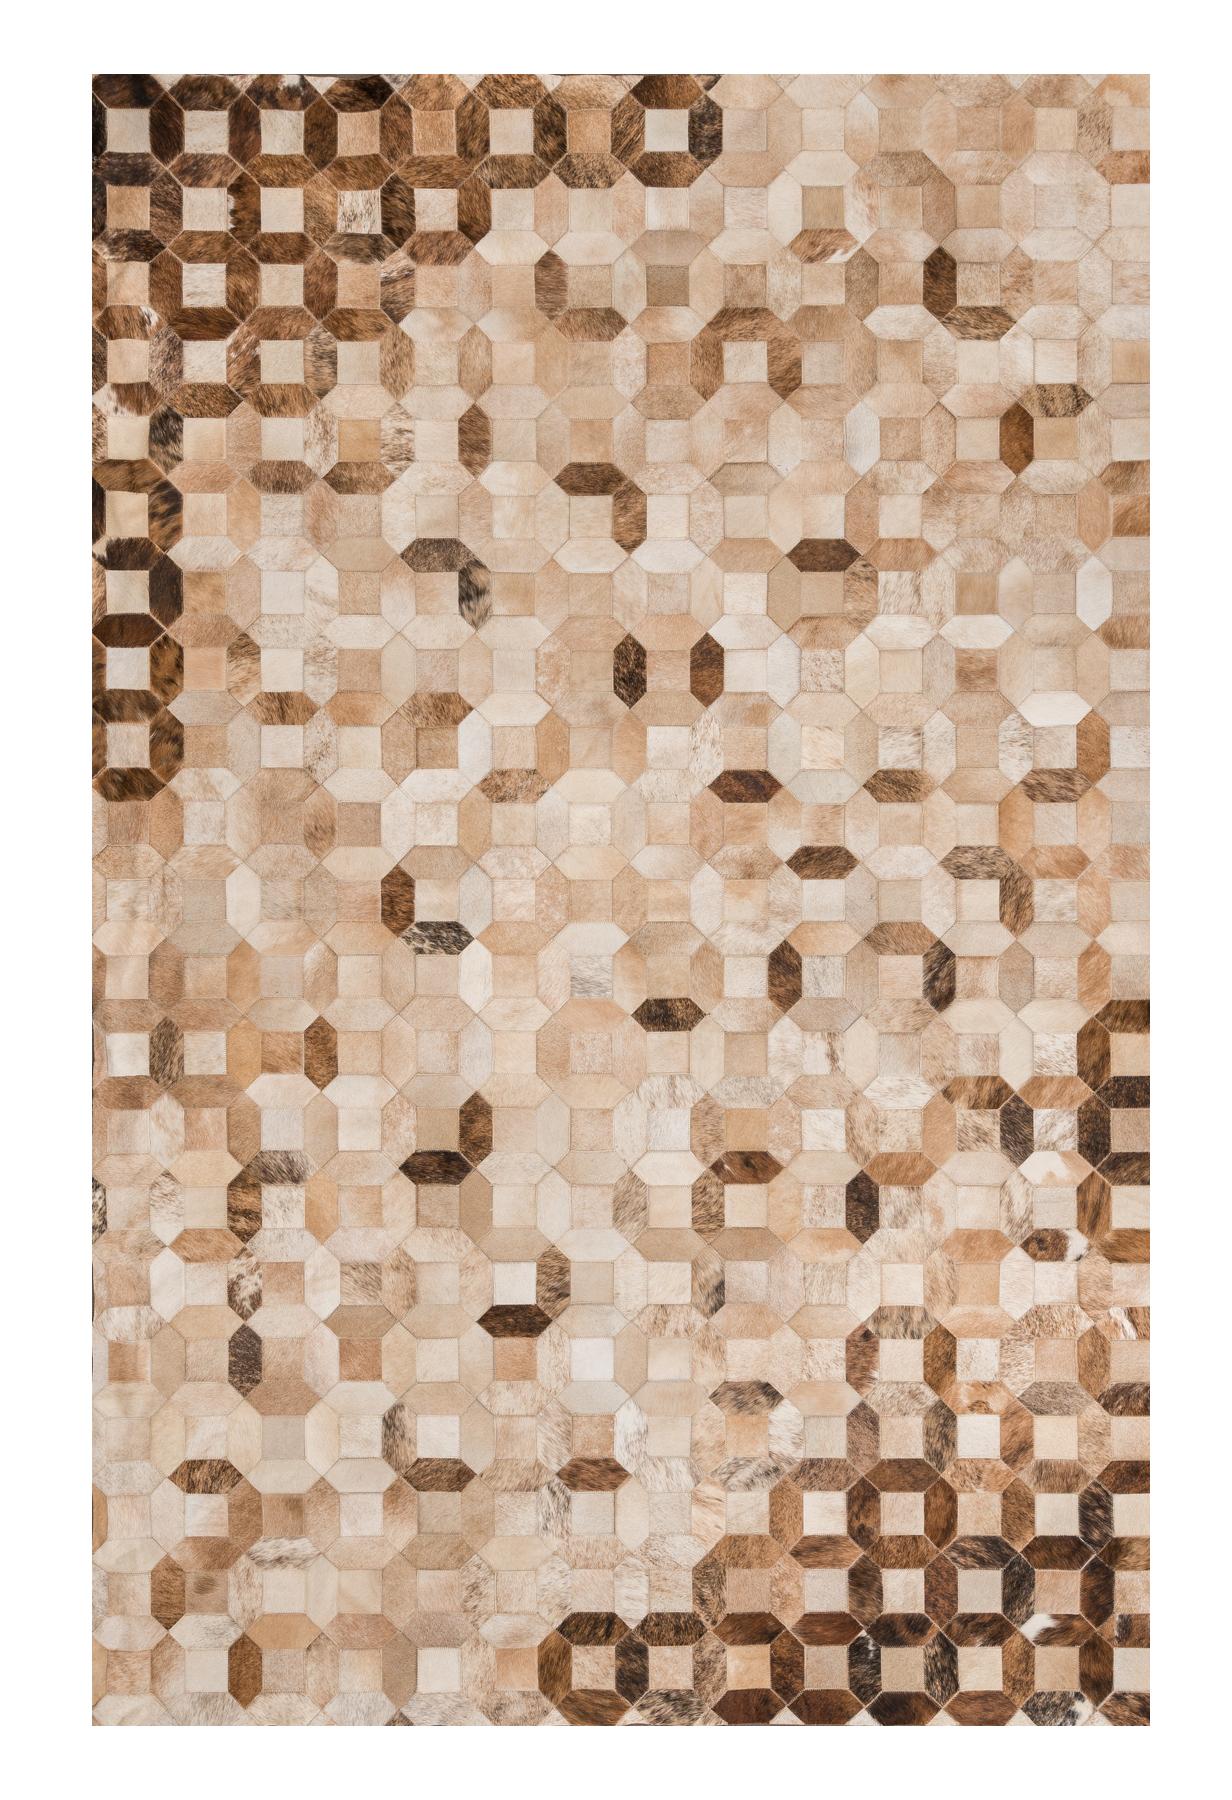 Pakistani Natural Caramel Color Graphic Patterned Cowhide Area Floor Rug Small For Sale